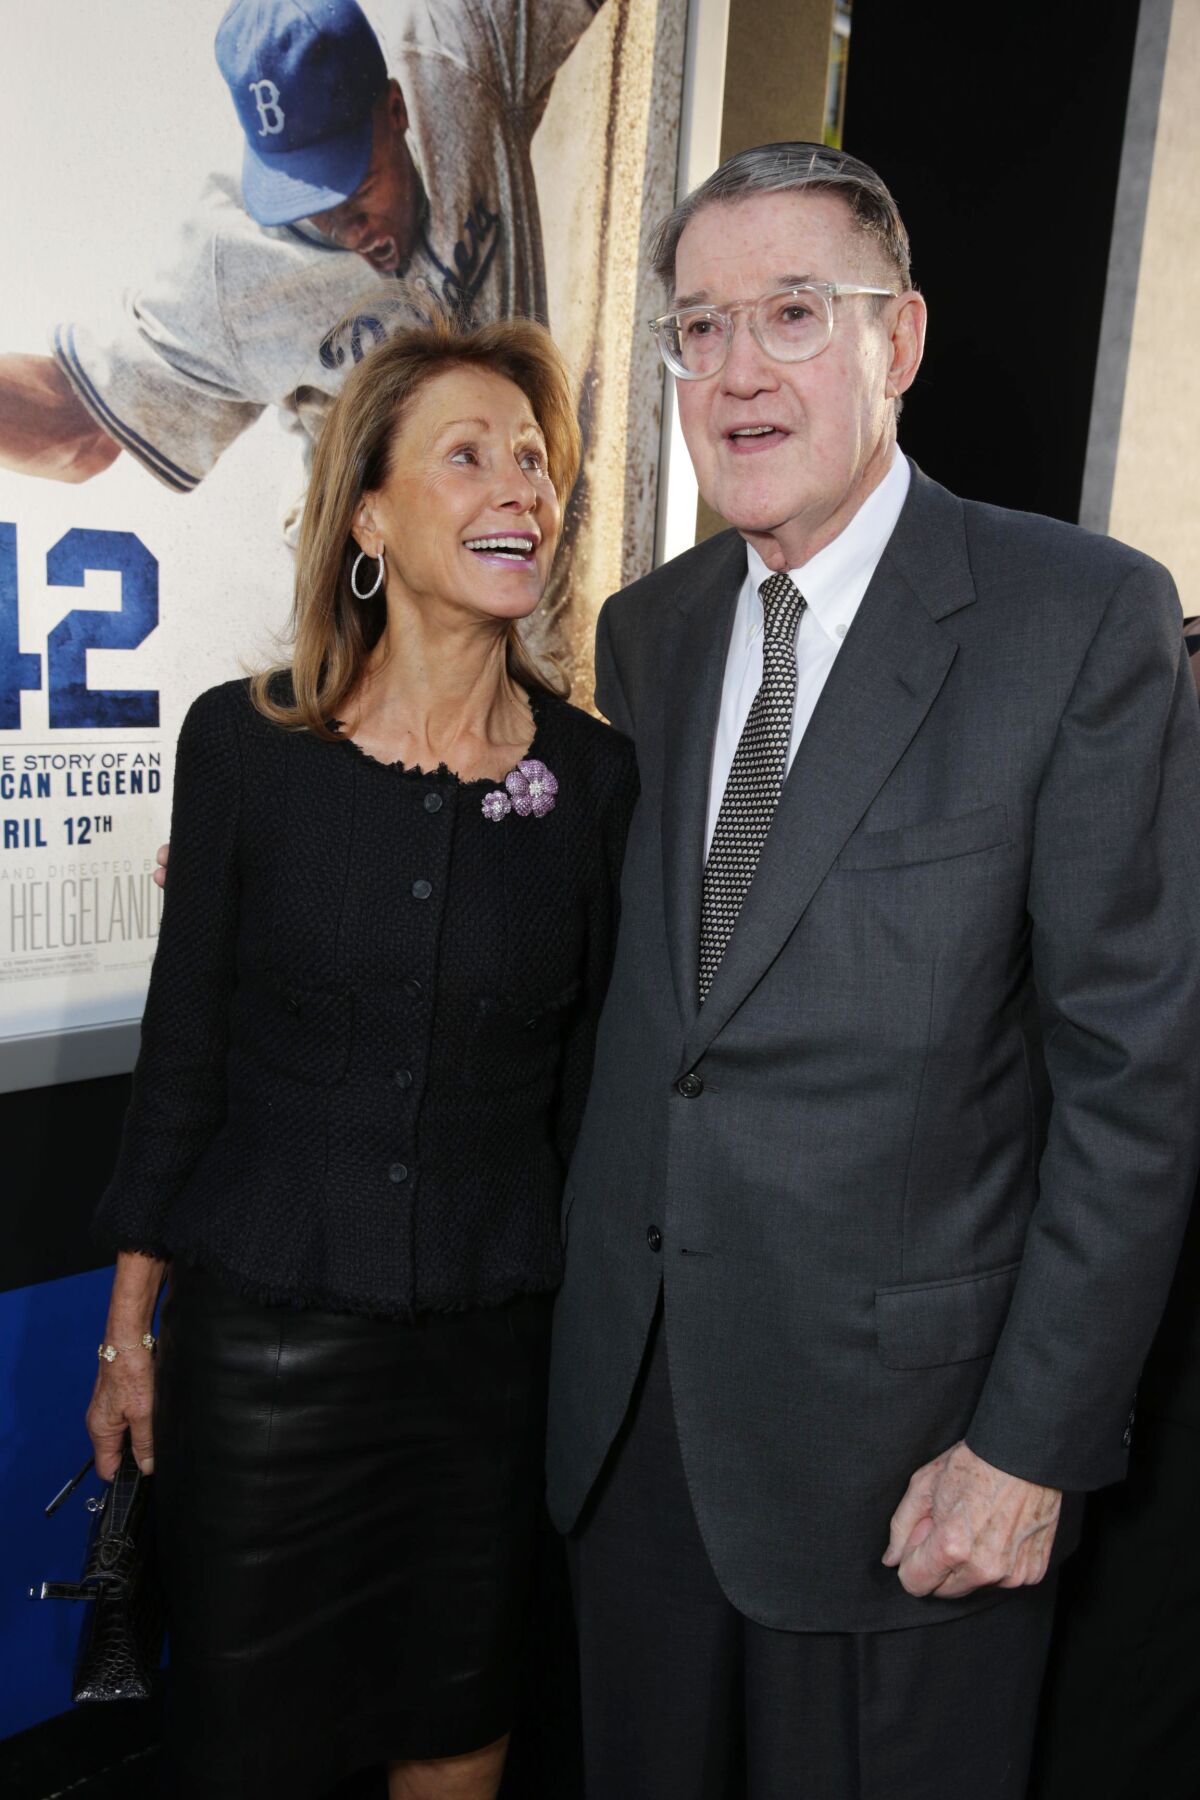 Annette and Peter O'Malley attend the L.A. premiere of the movie "42" on April 9, 2013.